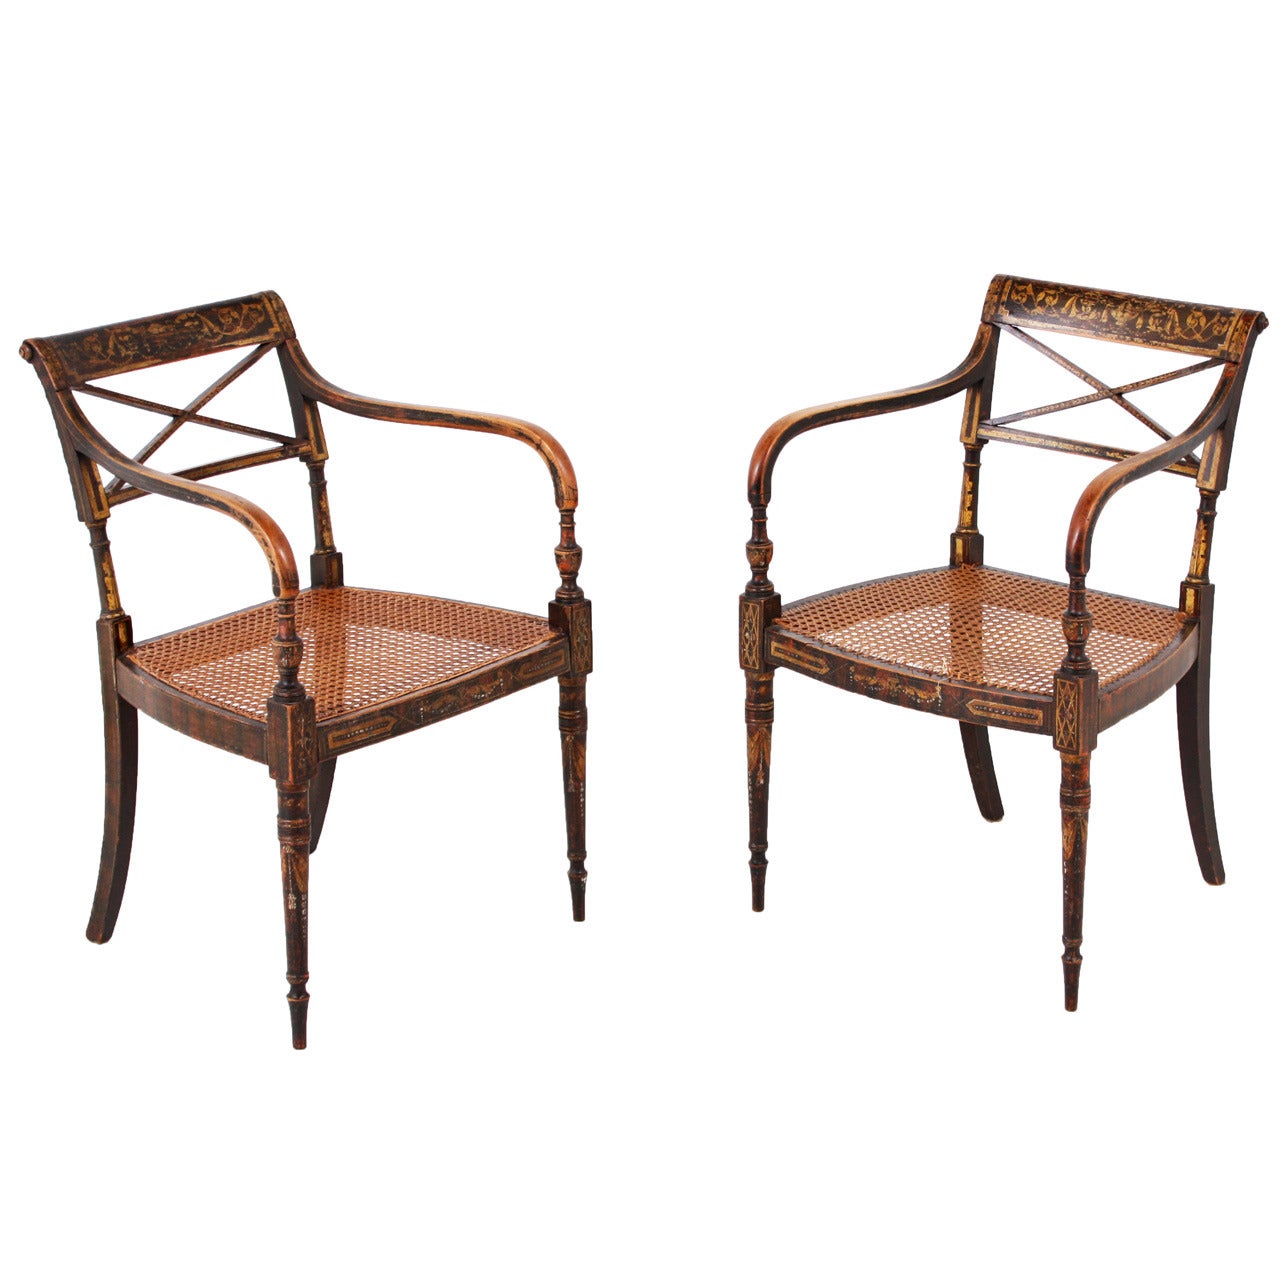 Pair of Regency Period English Armchairs with Original Paint